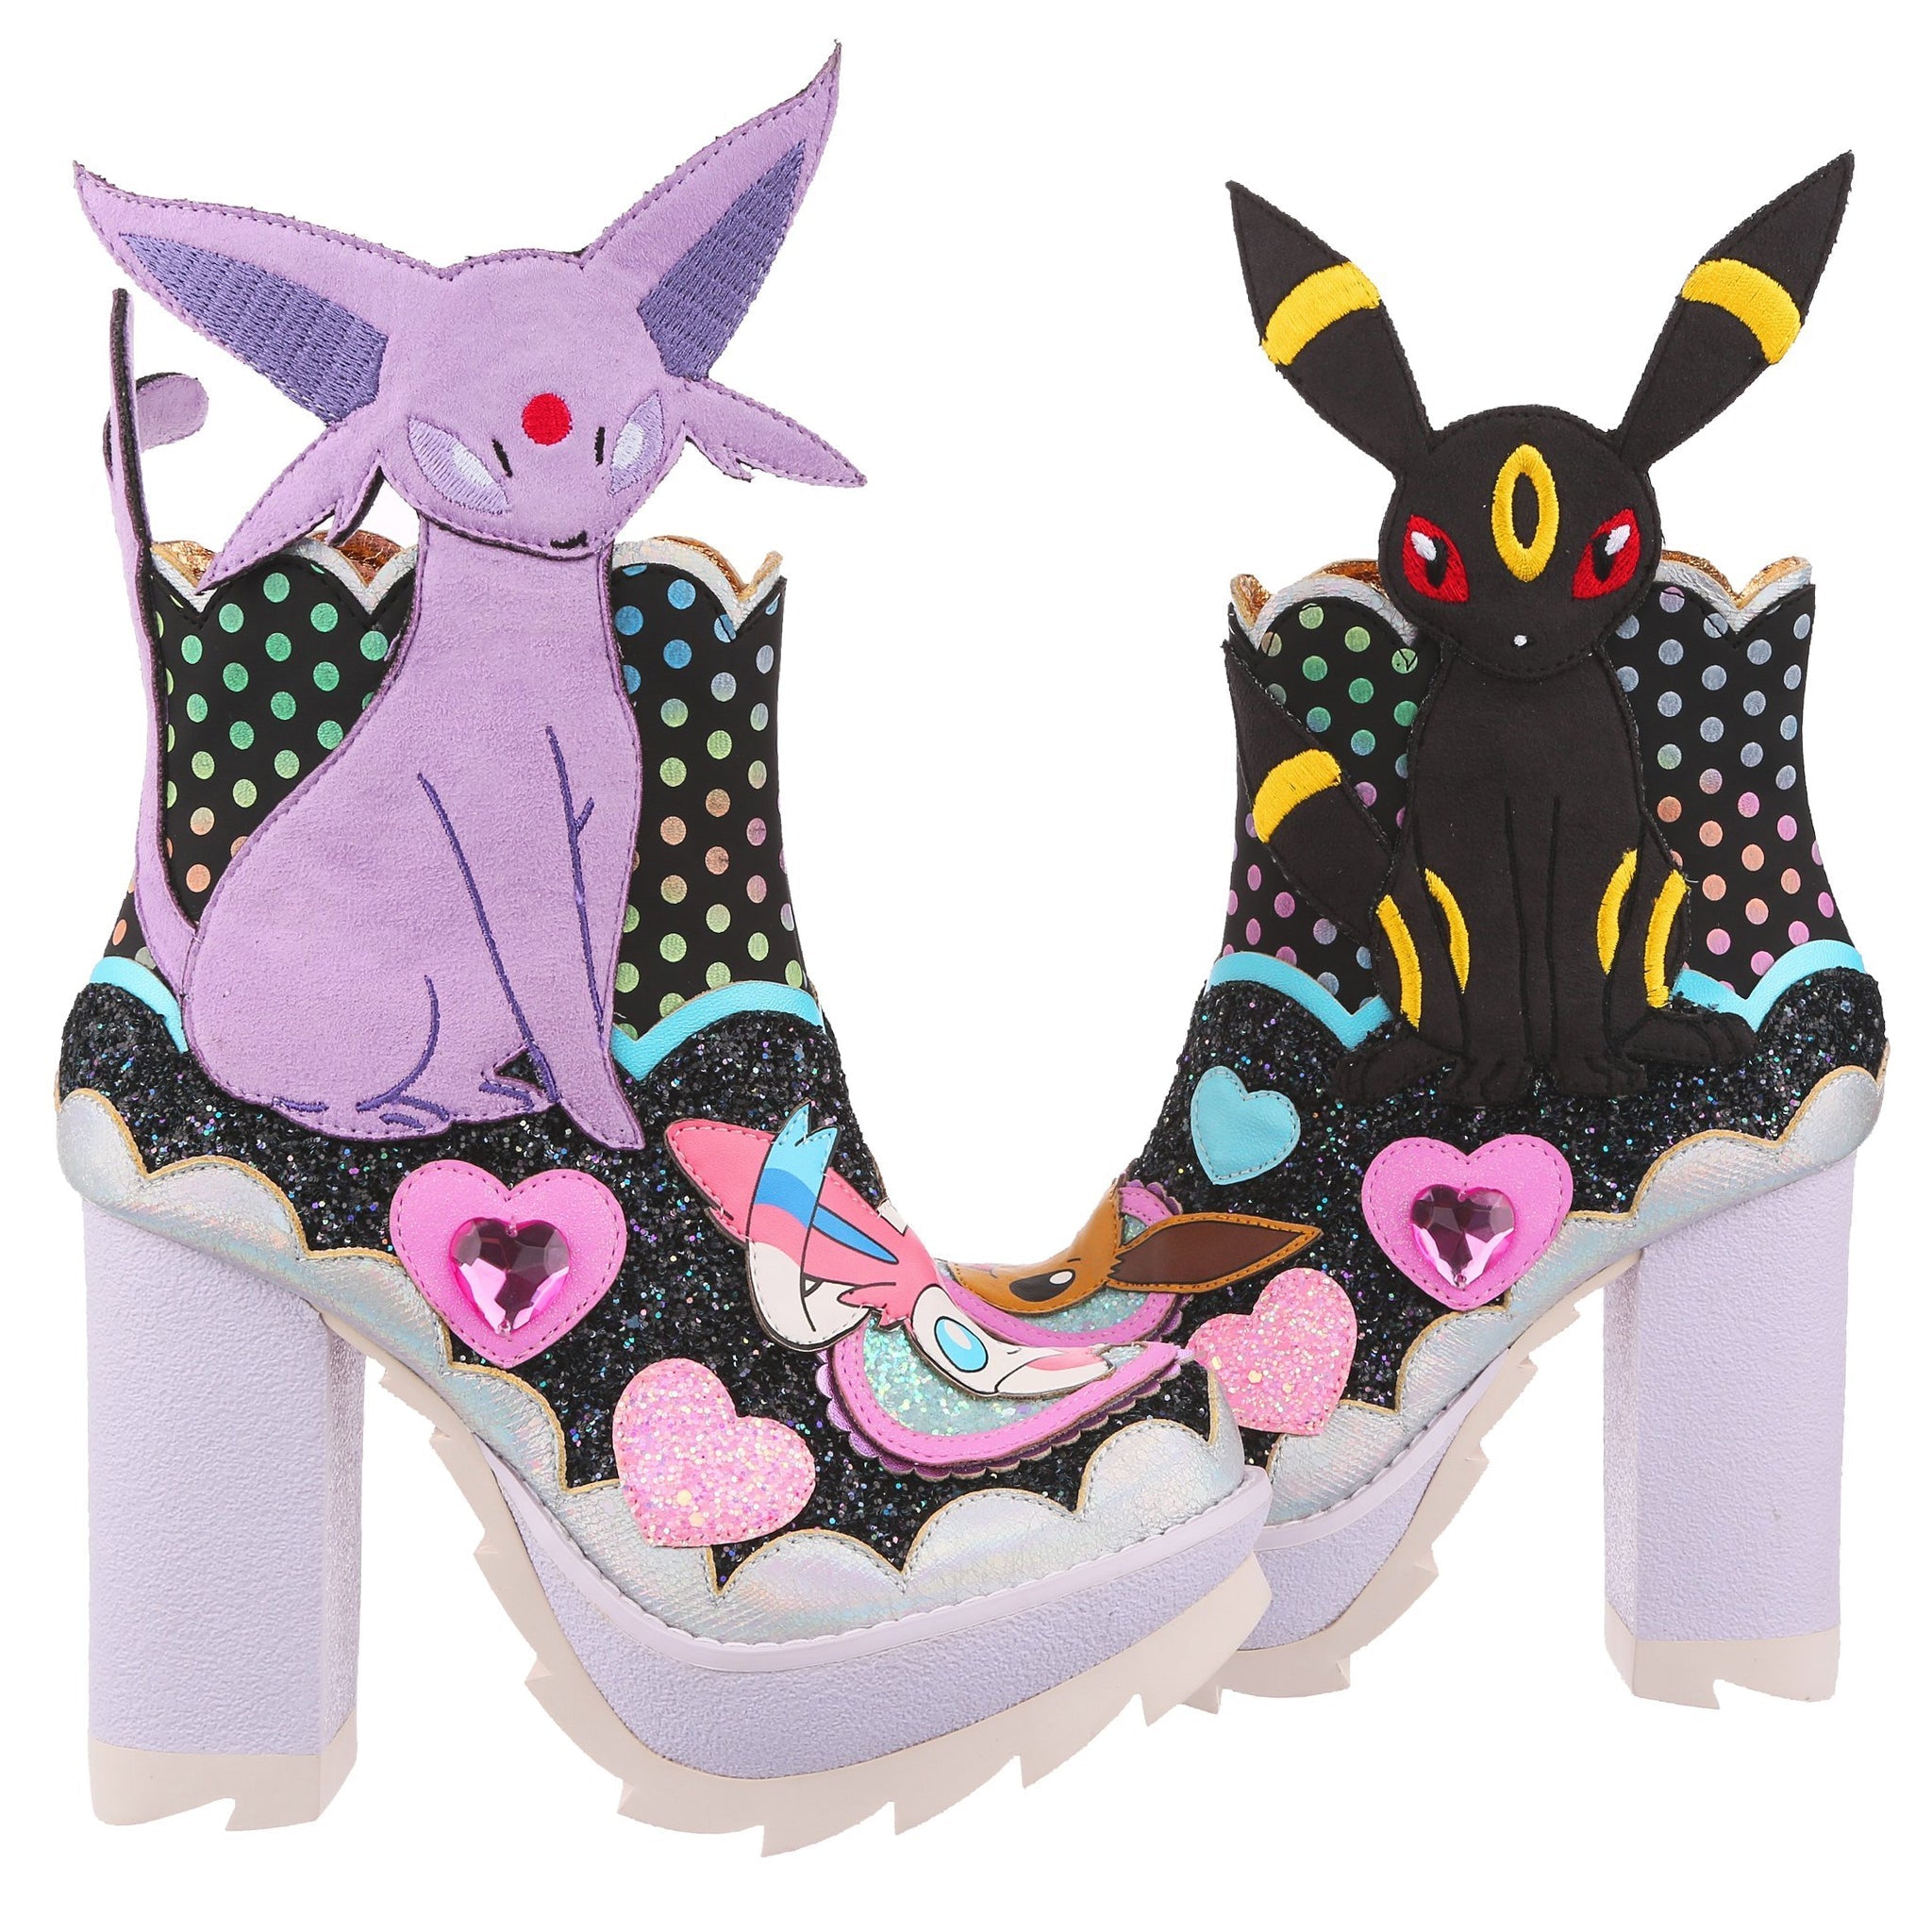 Chunky high heel boots with a scalloped top and pastel rainbow dots on a black fabric is above a black glitter encrusted shoe of the boot. Large applique characters of Espeon and Umbreon sit on the outside ankles, their heads and ears poke above the top of the boot. On the toes, in pink and blue glitter hearts are the faces of Eevee and Sylveon. The boot sits on a chunky lilac platform and high heel.